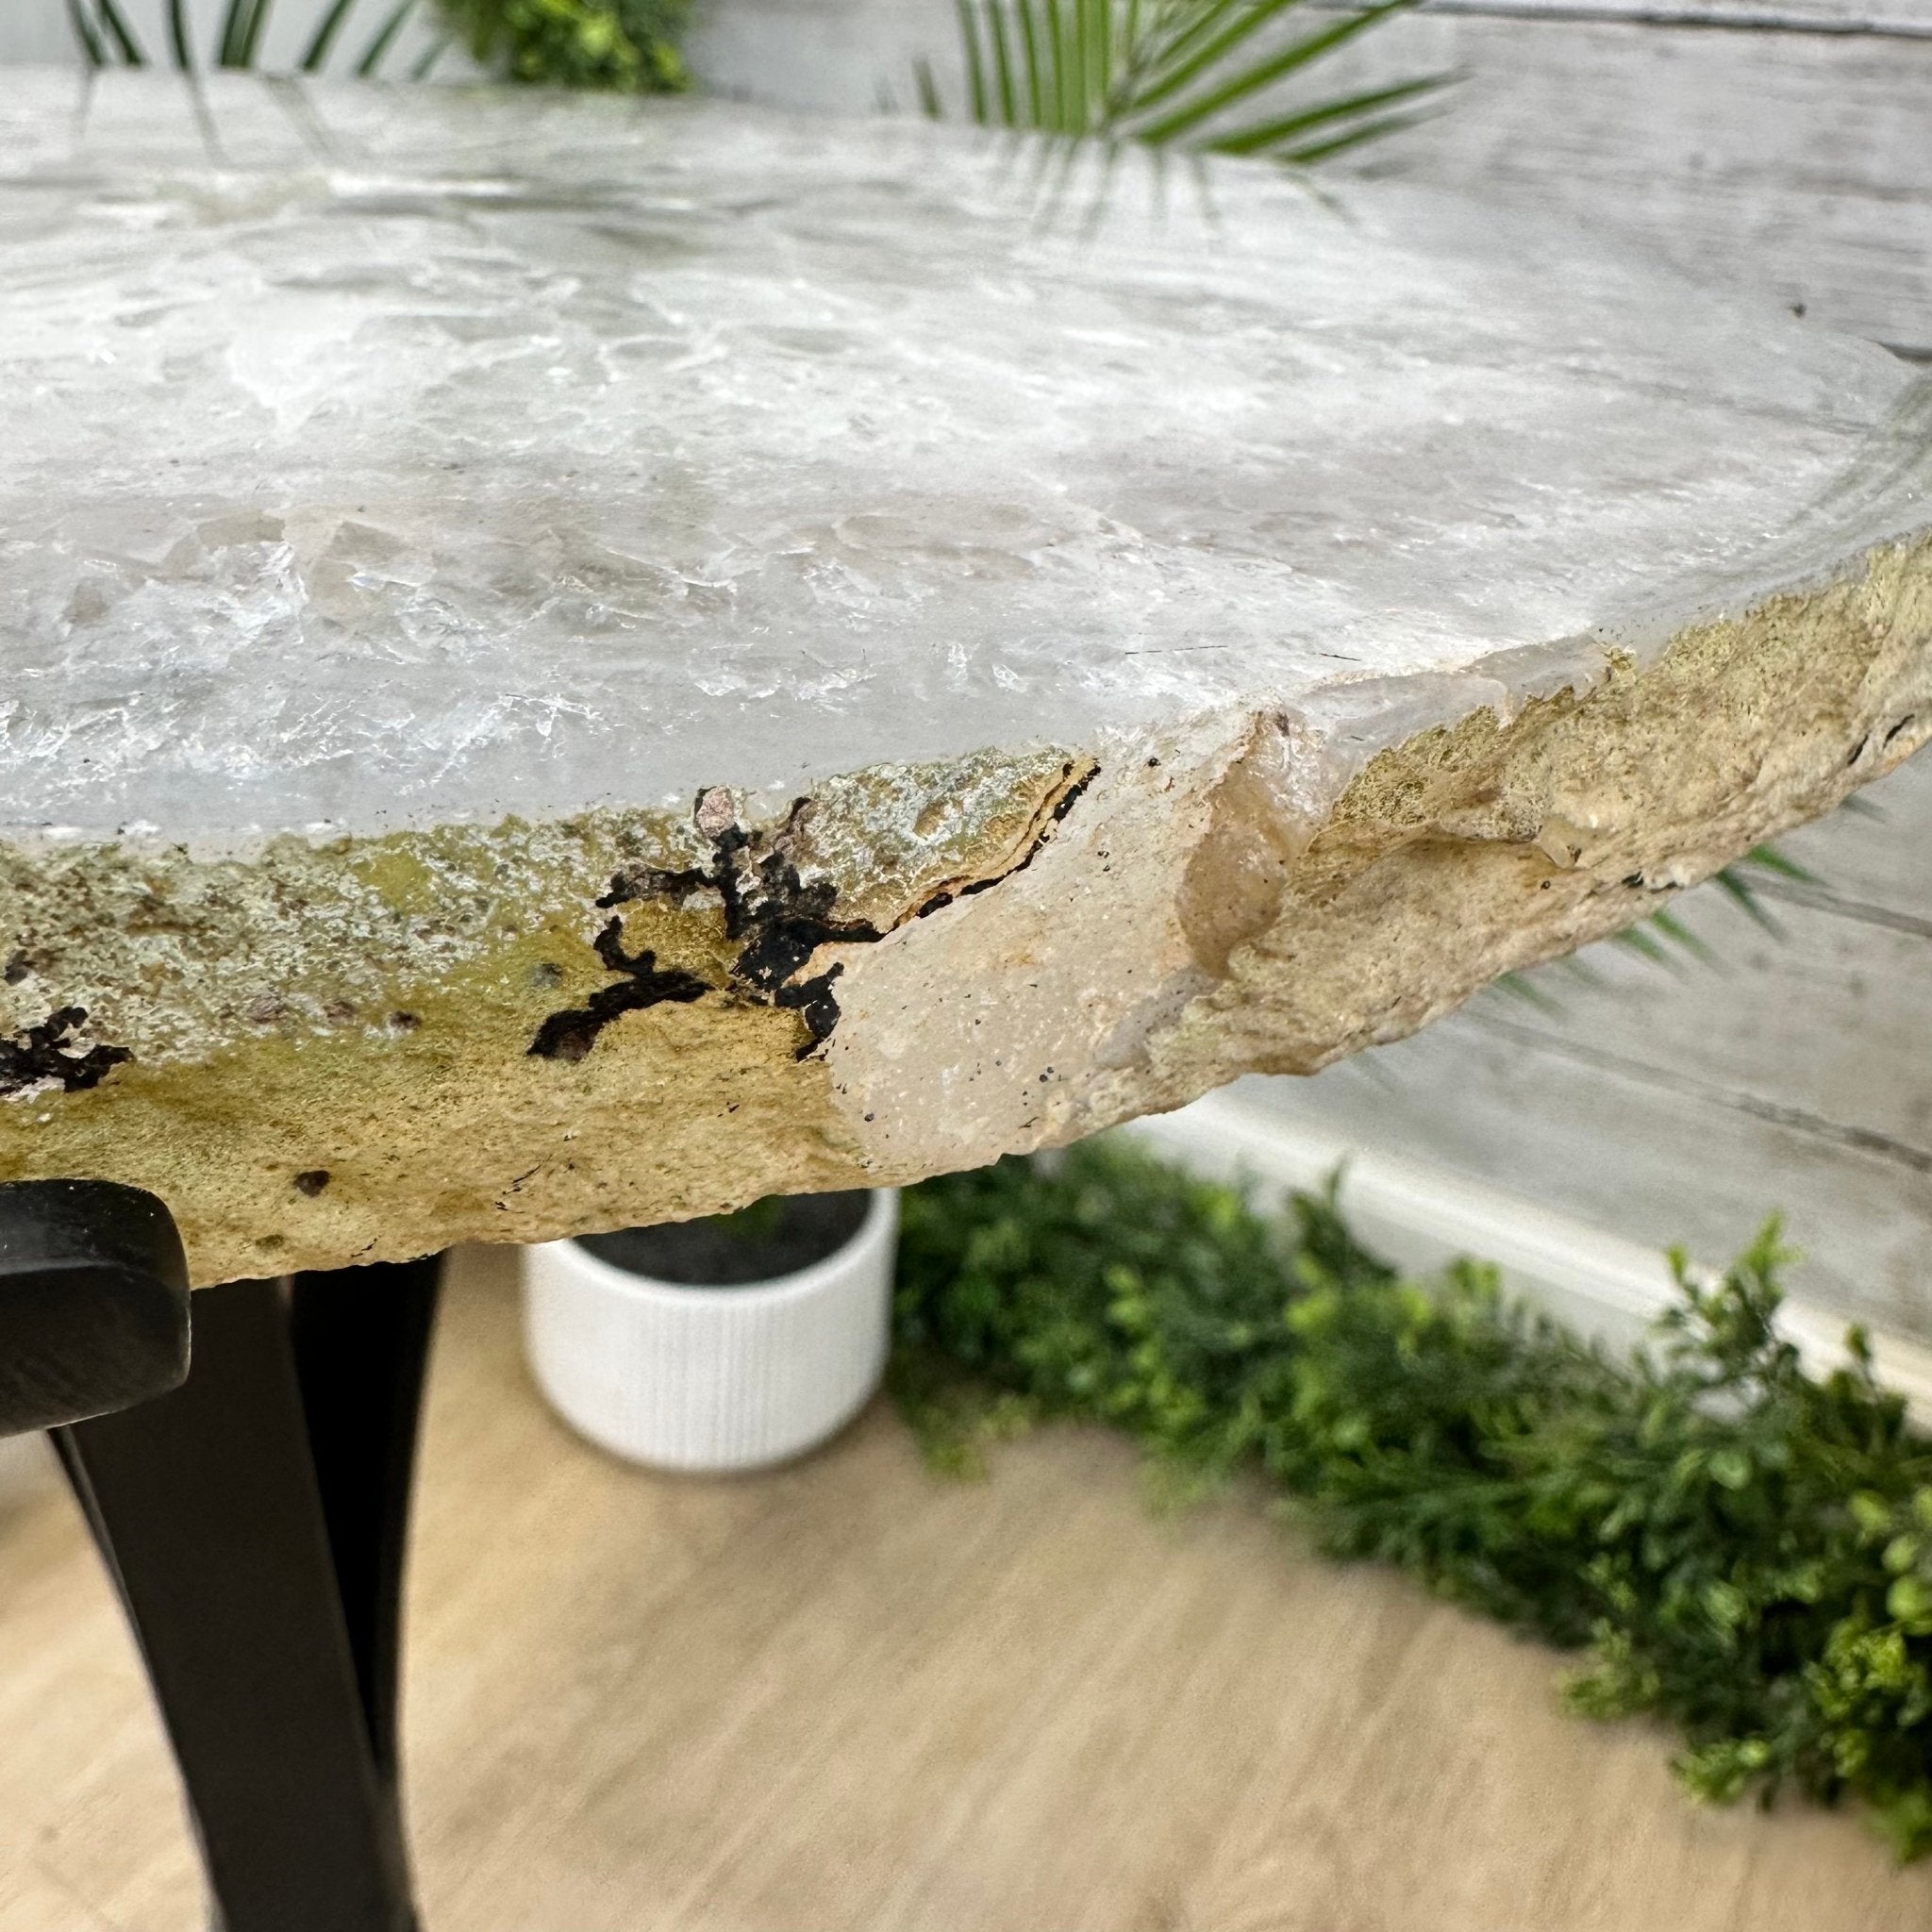 Natural Brazilian Agate Side Table on a black metal base, 22" tall #1305-0160 by Brazil Gems - Brazil GemsBrazil GemsNatural Brazilian Agate Side Table on a black metal base, 22" tall #1305-0160 by Brazil GemsTables: Side1305-0160